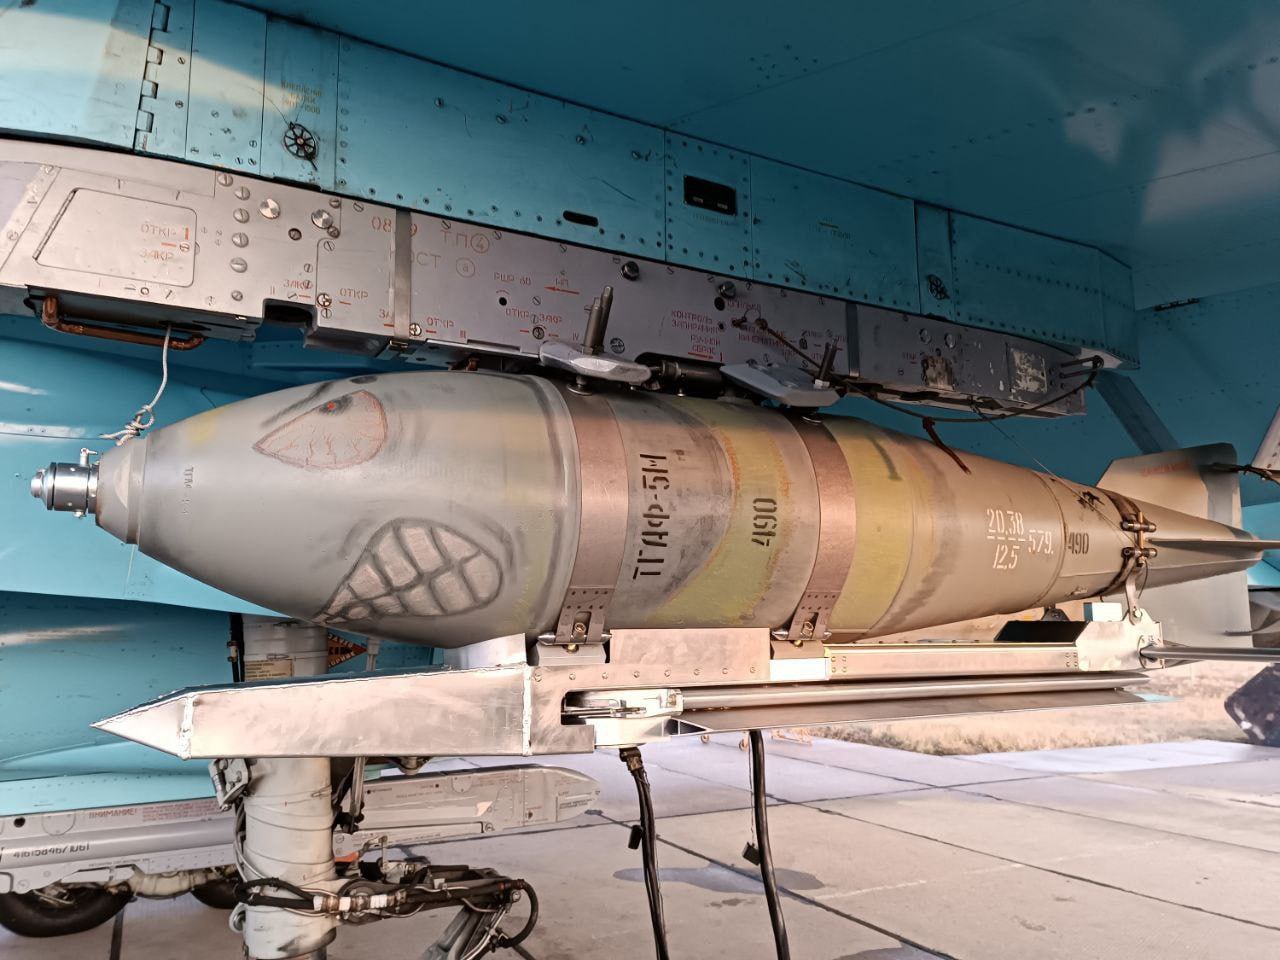 The russian armed forces used the counterpart of JDAM-ER smart bomb for the first time, but the wings fell off during flight